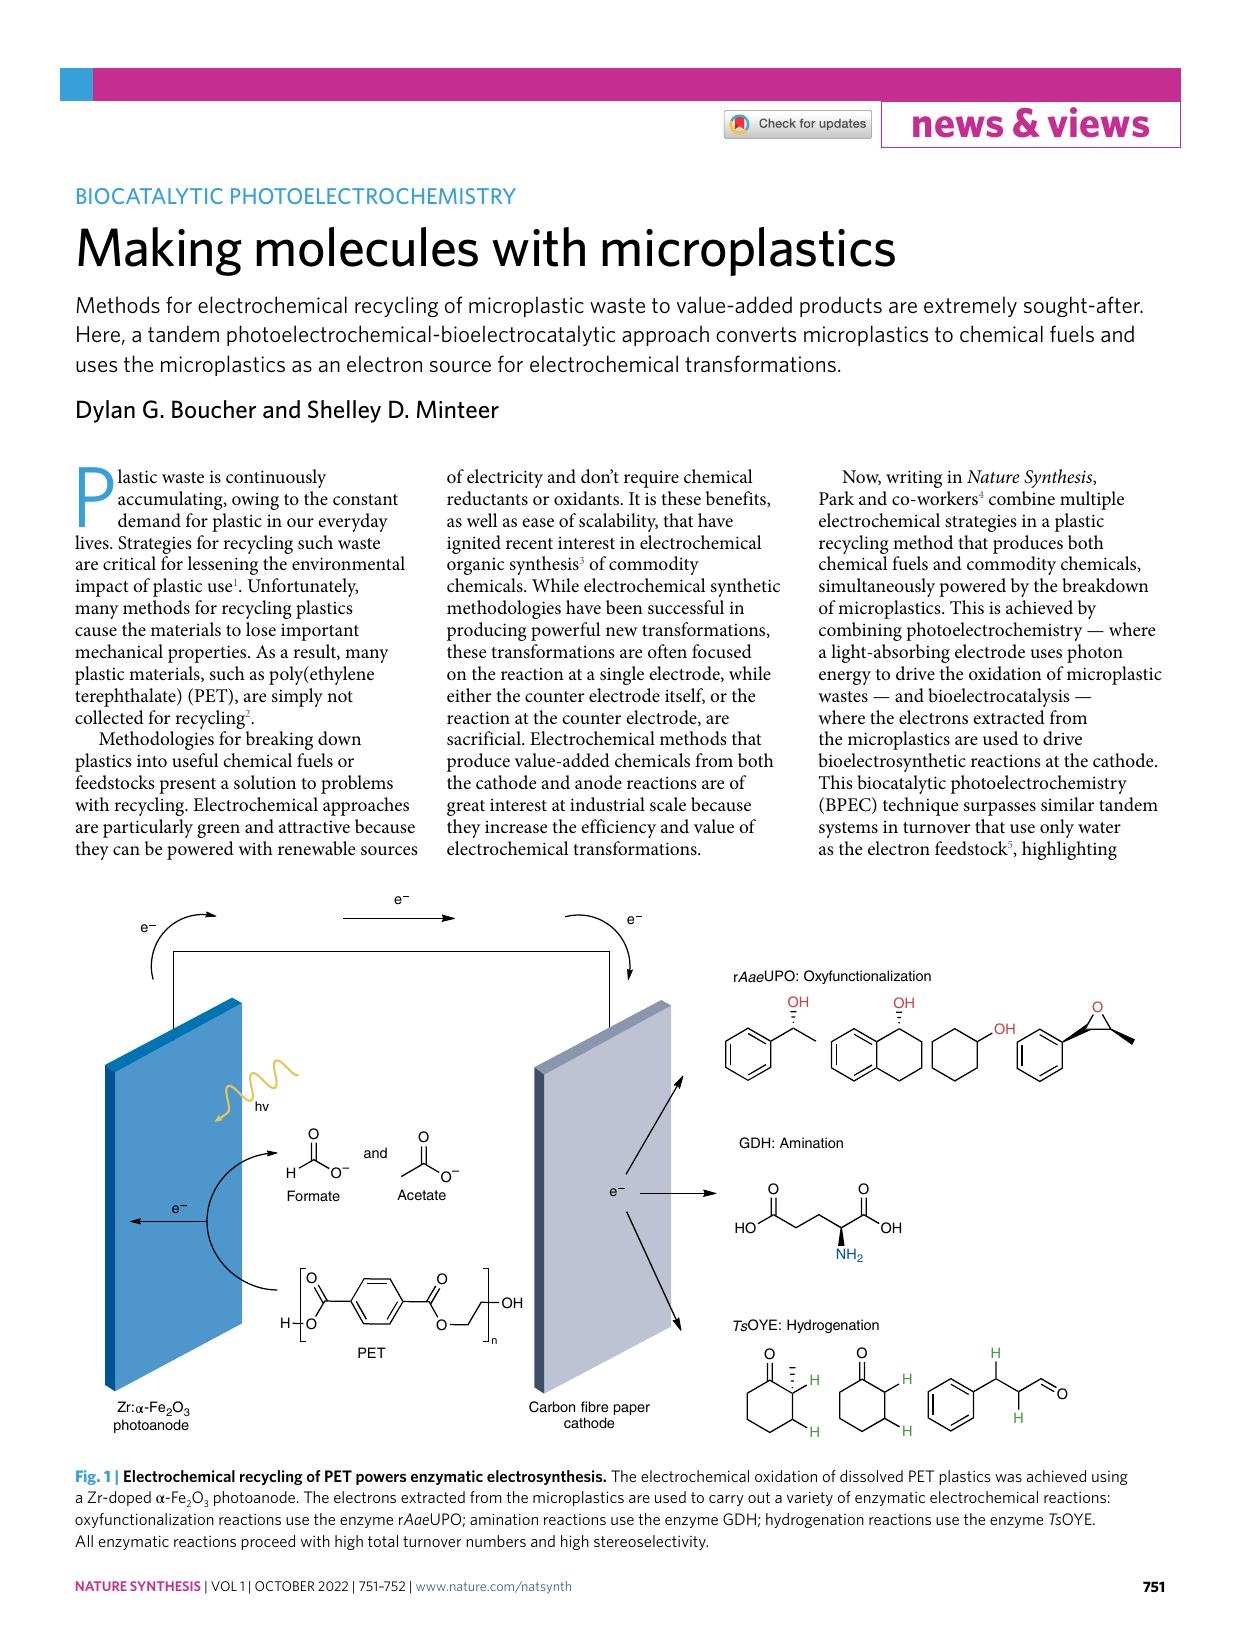 Making molecules with microplastics by Dylan G. Boucher & Shelley D. Minteer